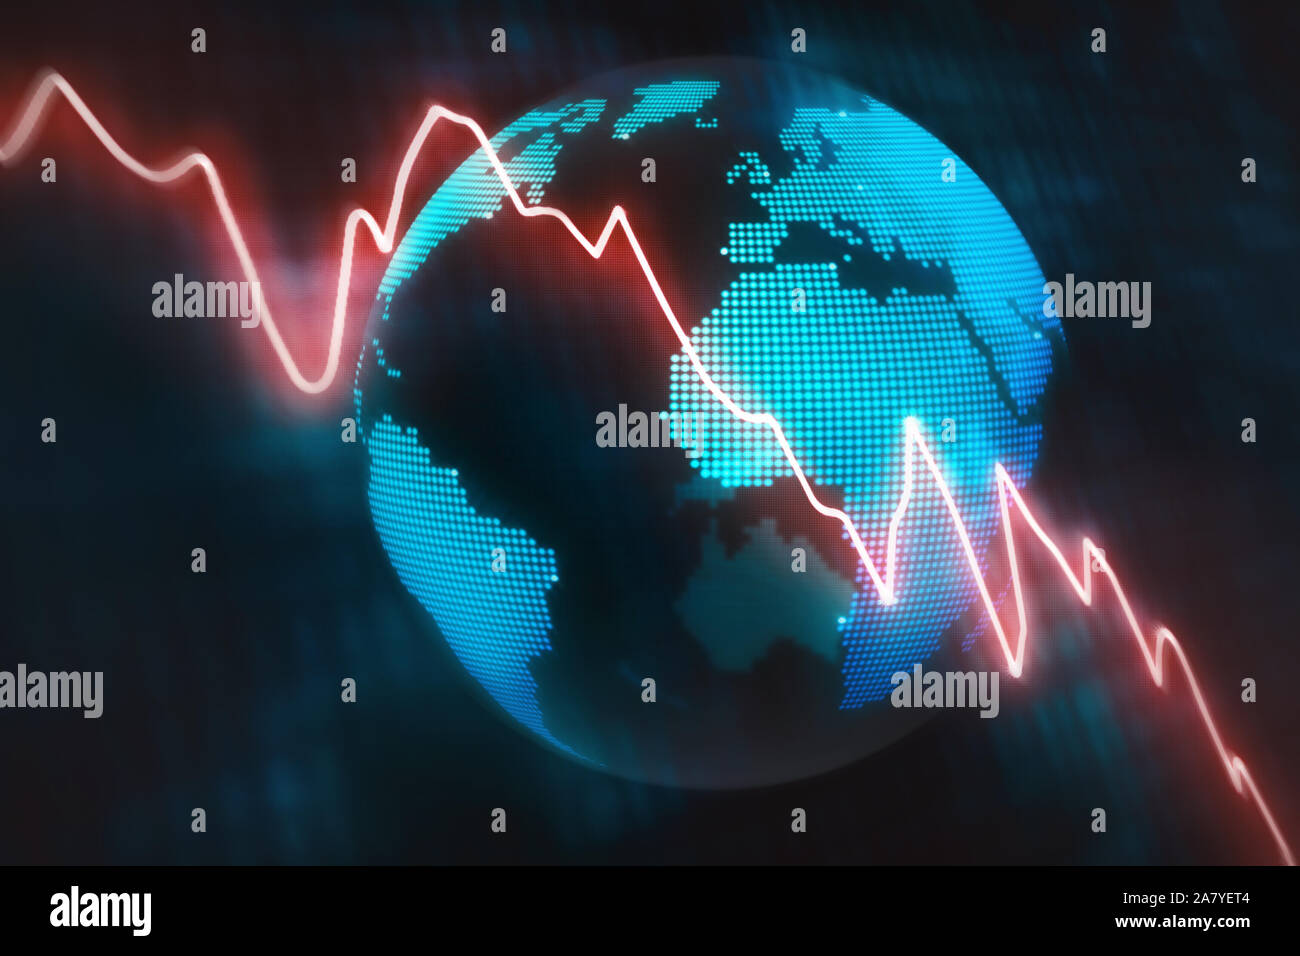 Illustrated concept wth a glowing red line graph decreasing at a fast rate with an abstract globe background Stock Photo